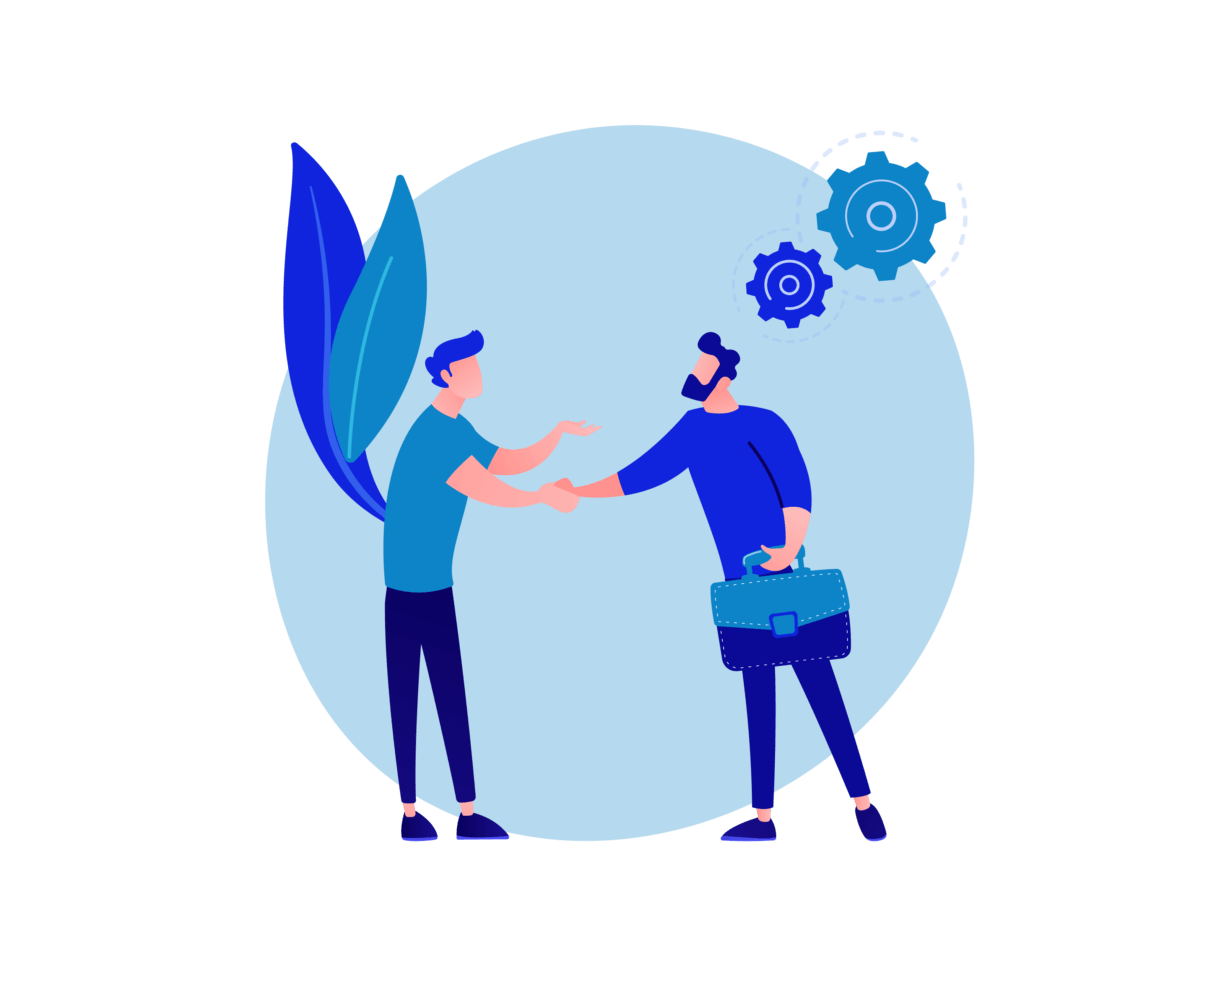 Illustration of two people shaking hands. in blue